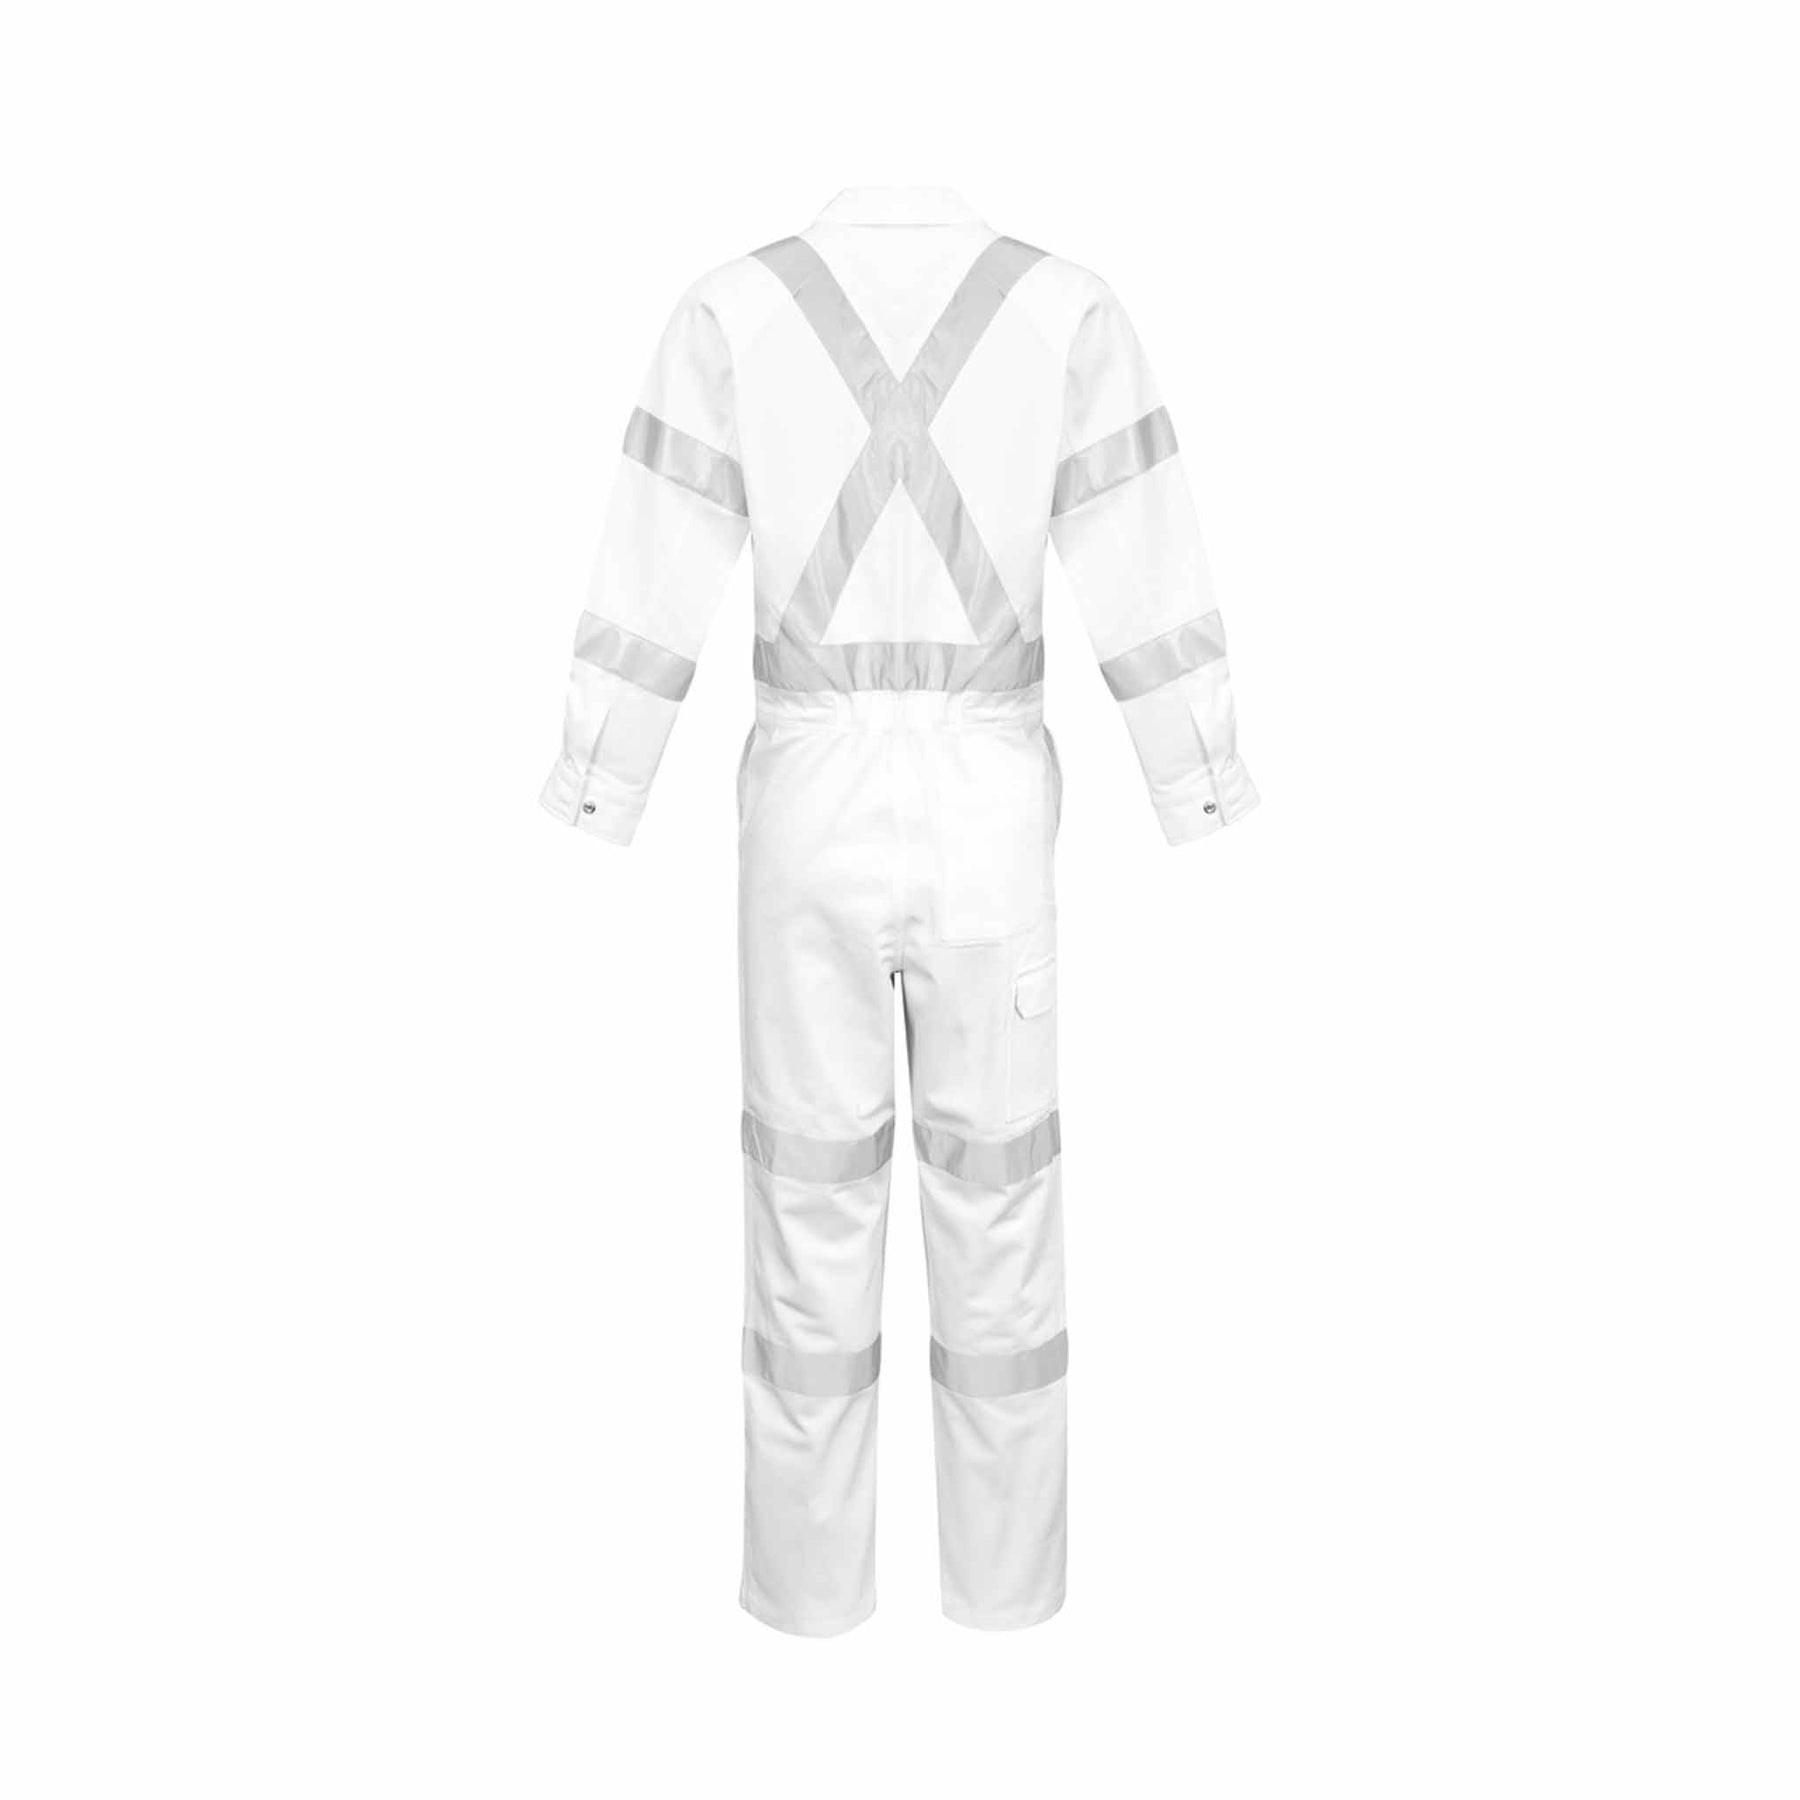 Long sleeved bio motion taped white overalls back view